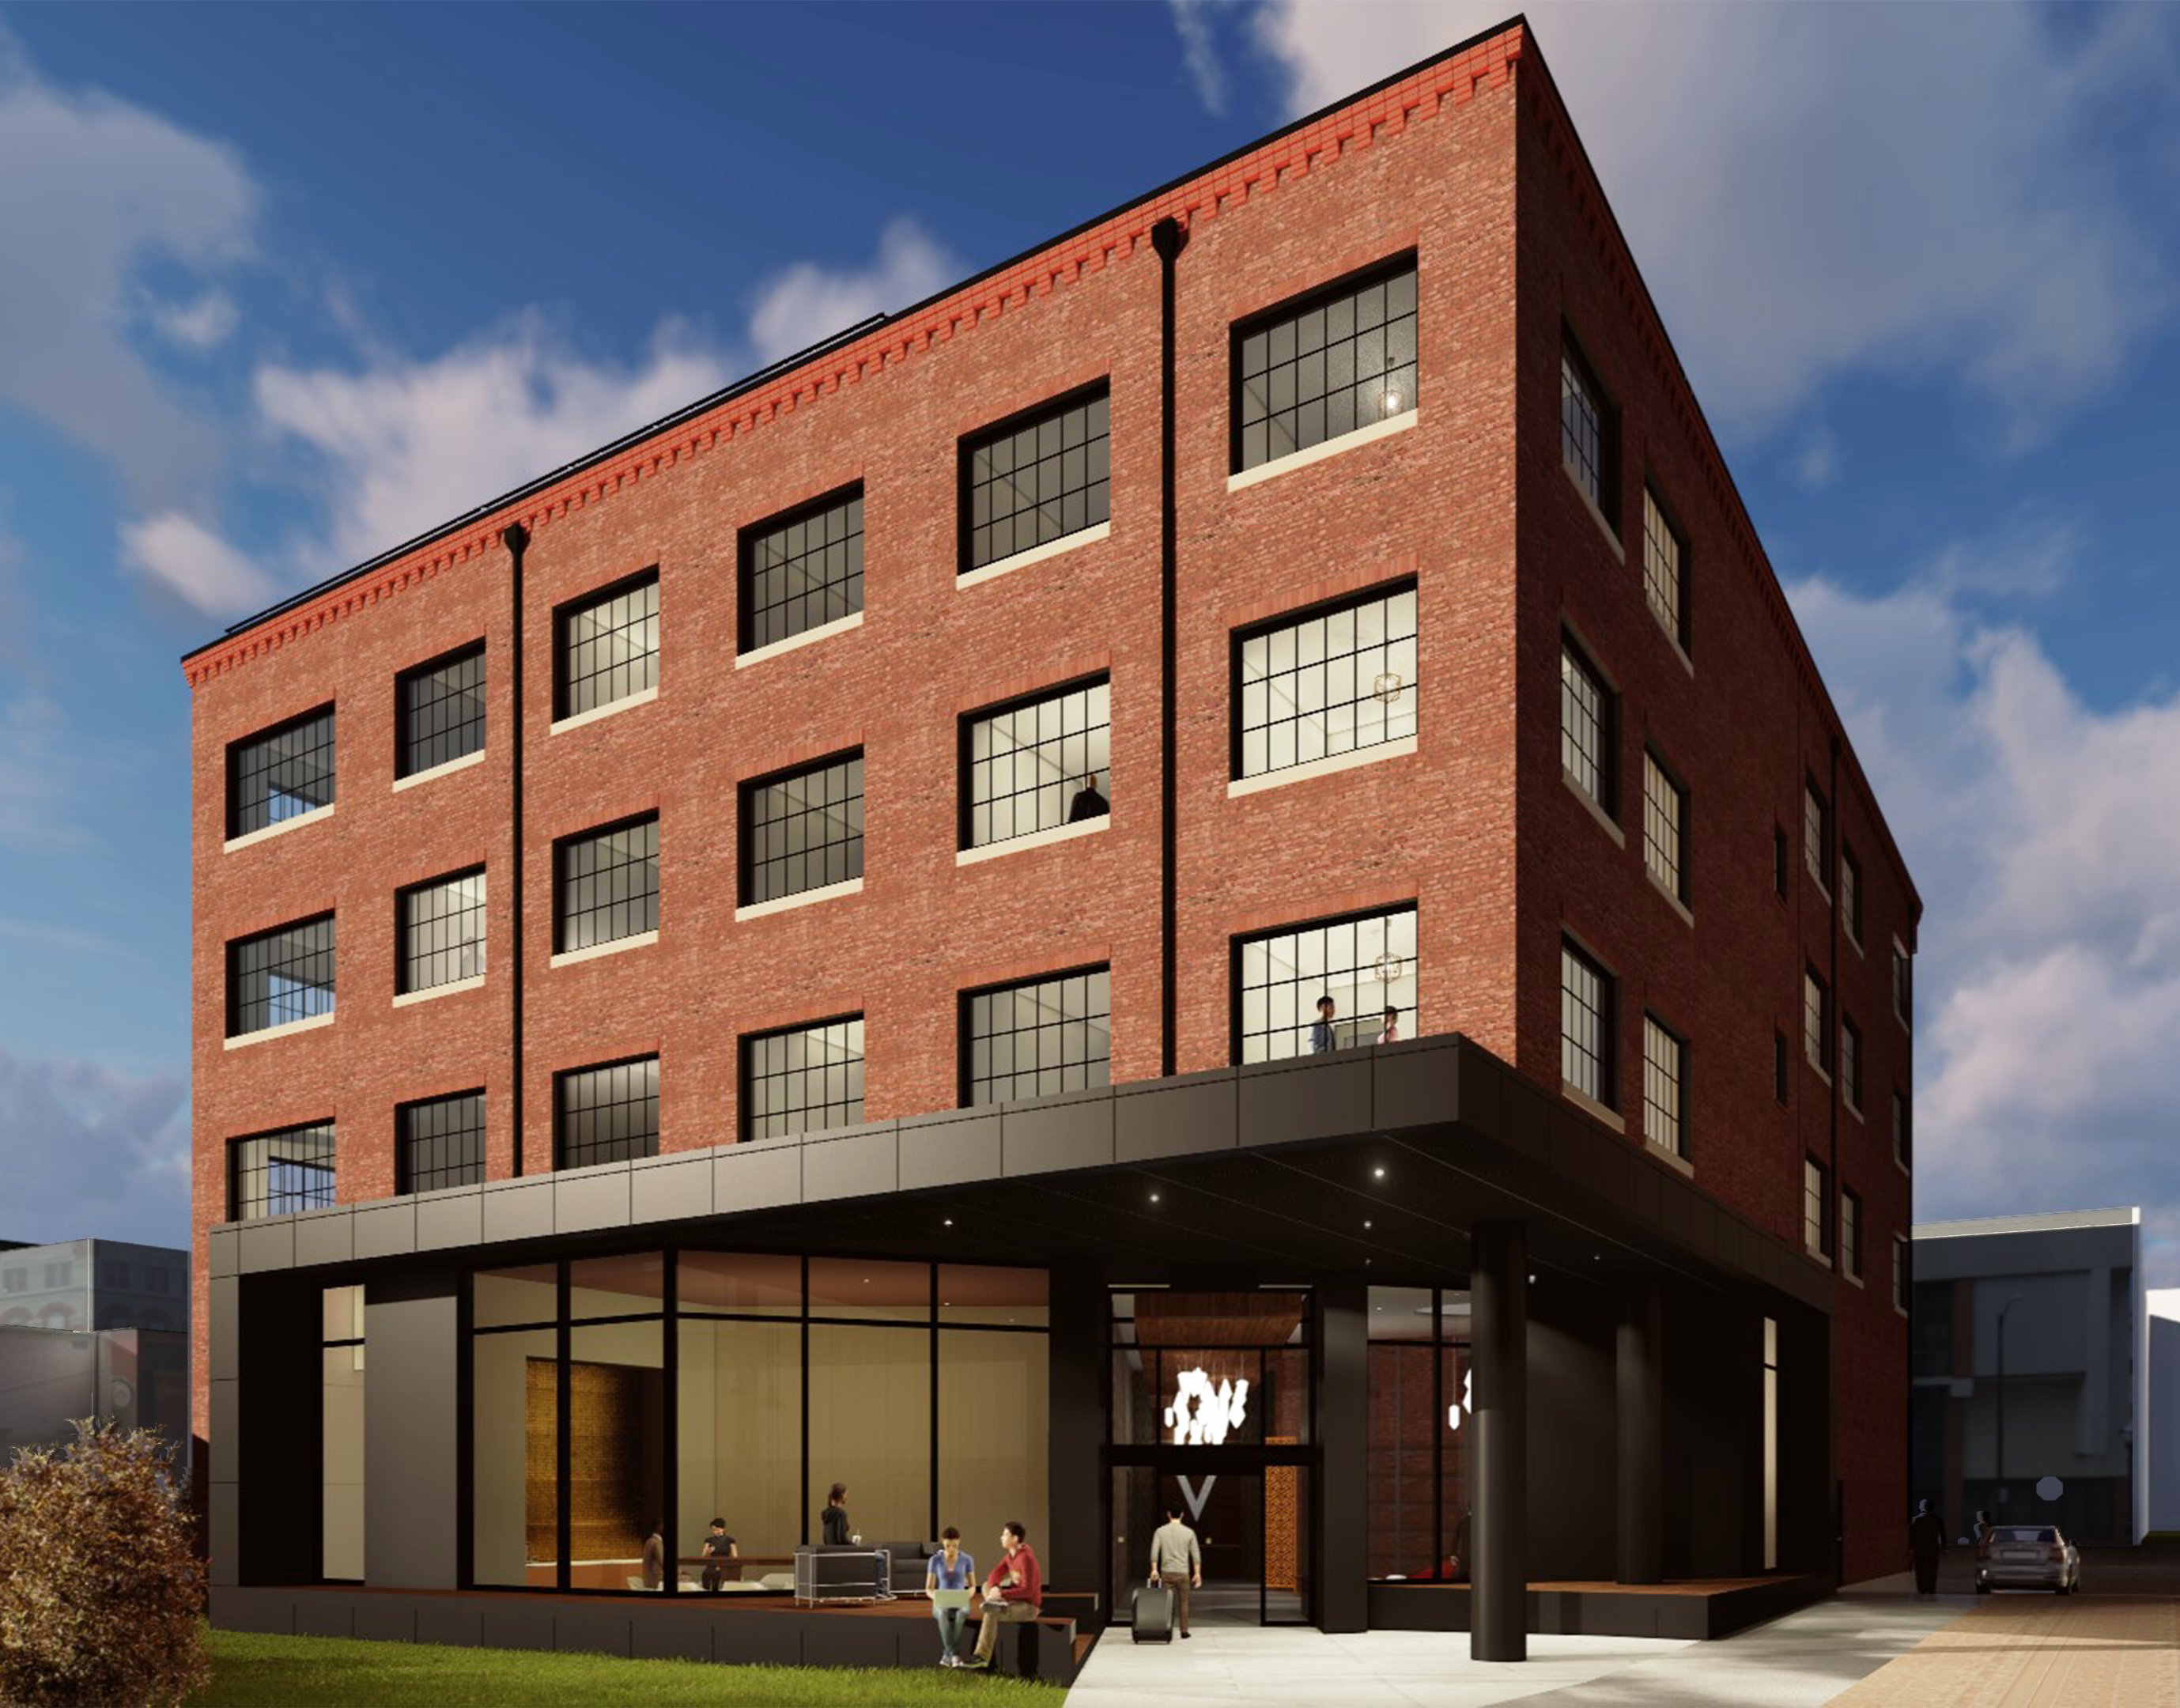 Plans for Hotel Vandivort's expansion in downtown Springfield MO